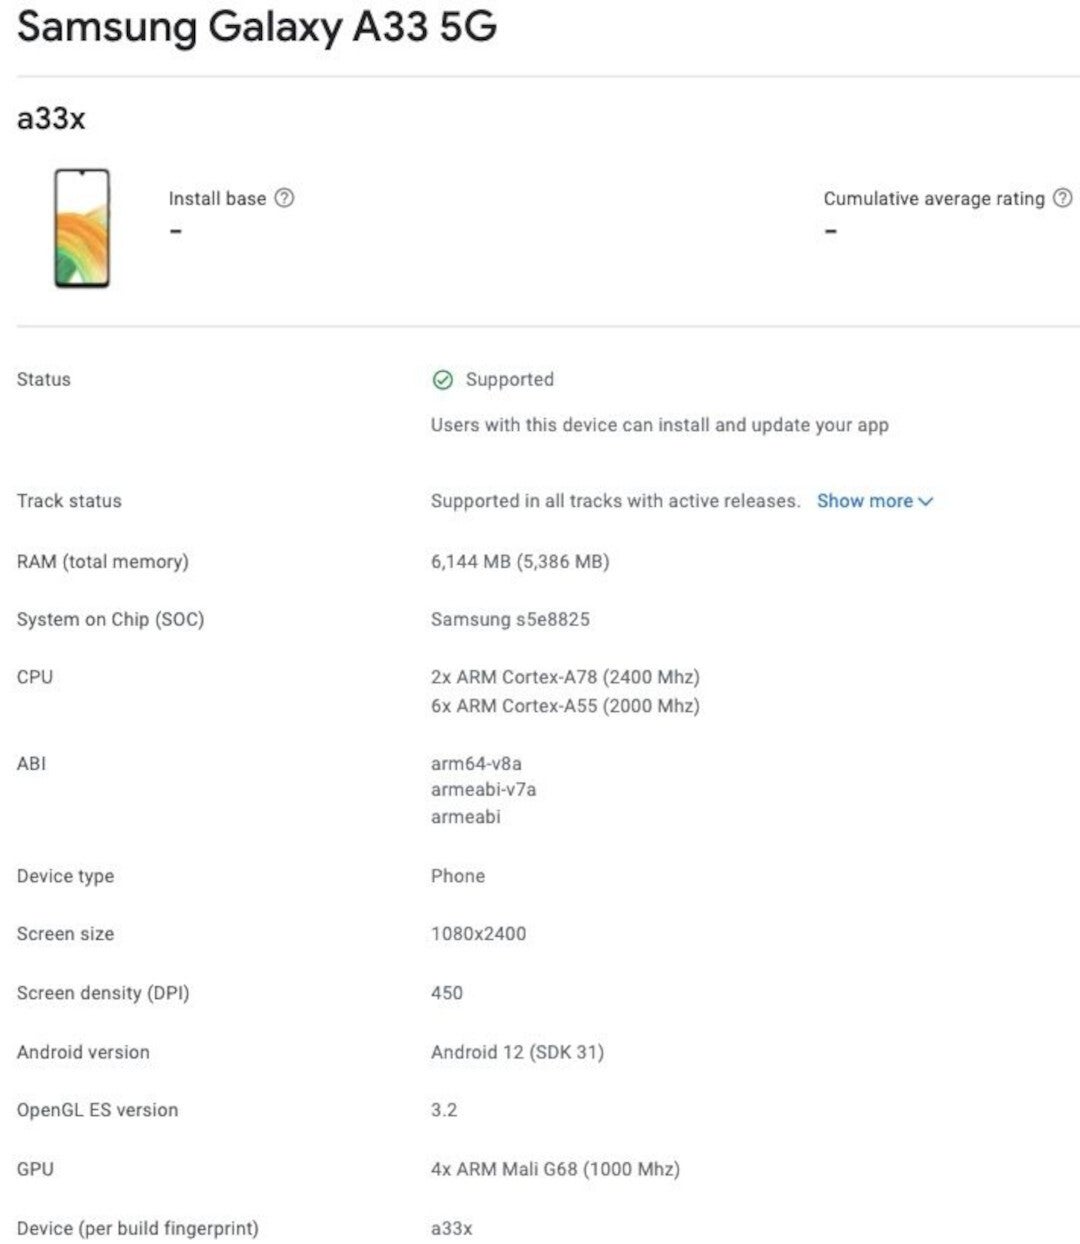 A new listing shows possible chipset and new specs for the upcoming Samsung Galaxy A33 5G